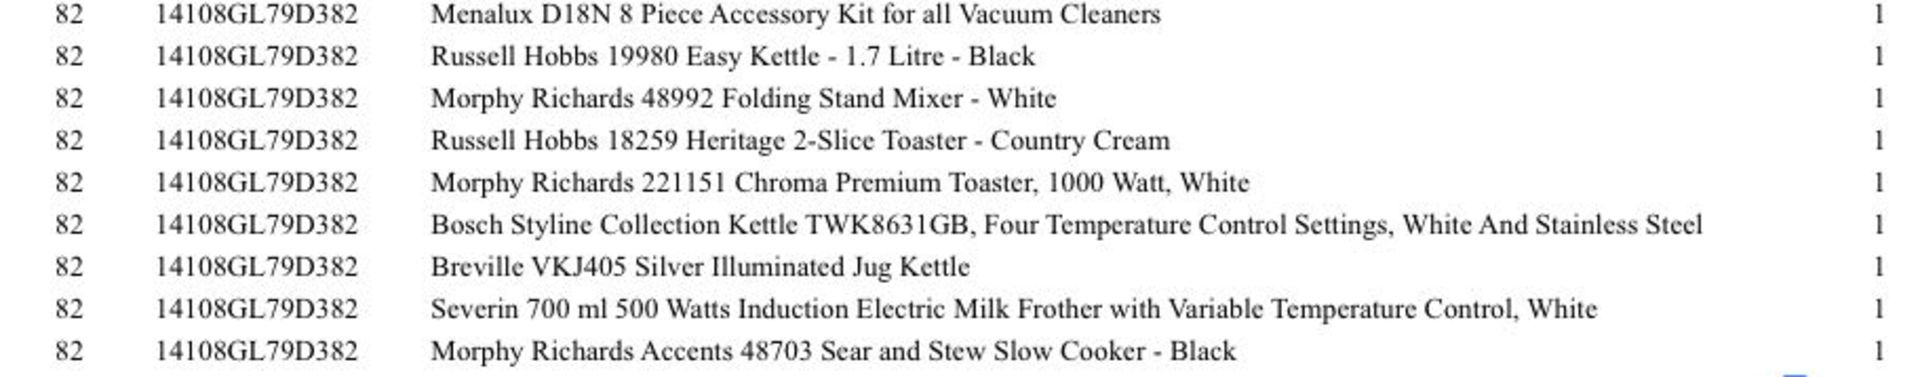 1 Pallet of Kitchen appliances & Accessories -  Full breakdown shown in images - Pallet Number - Image 2 of 4